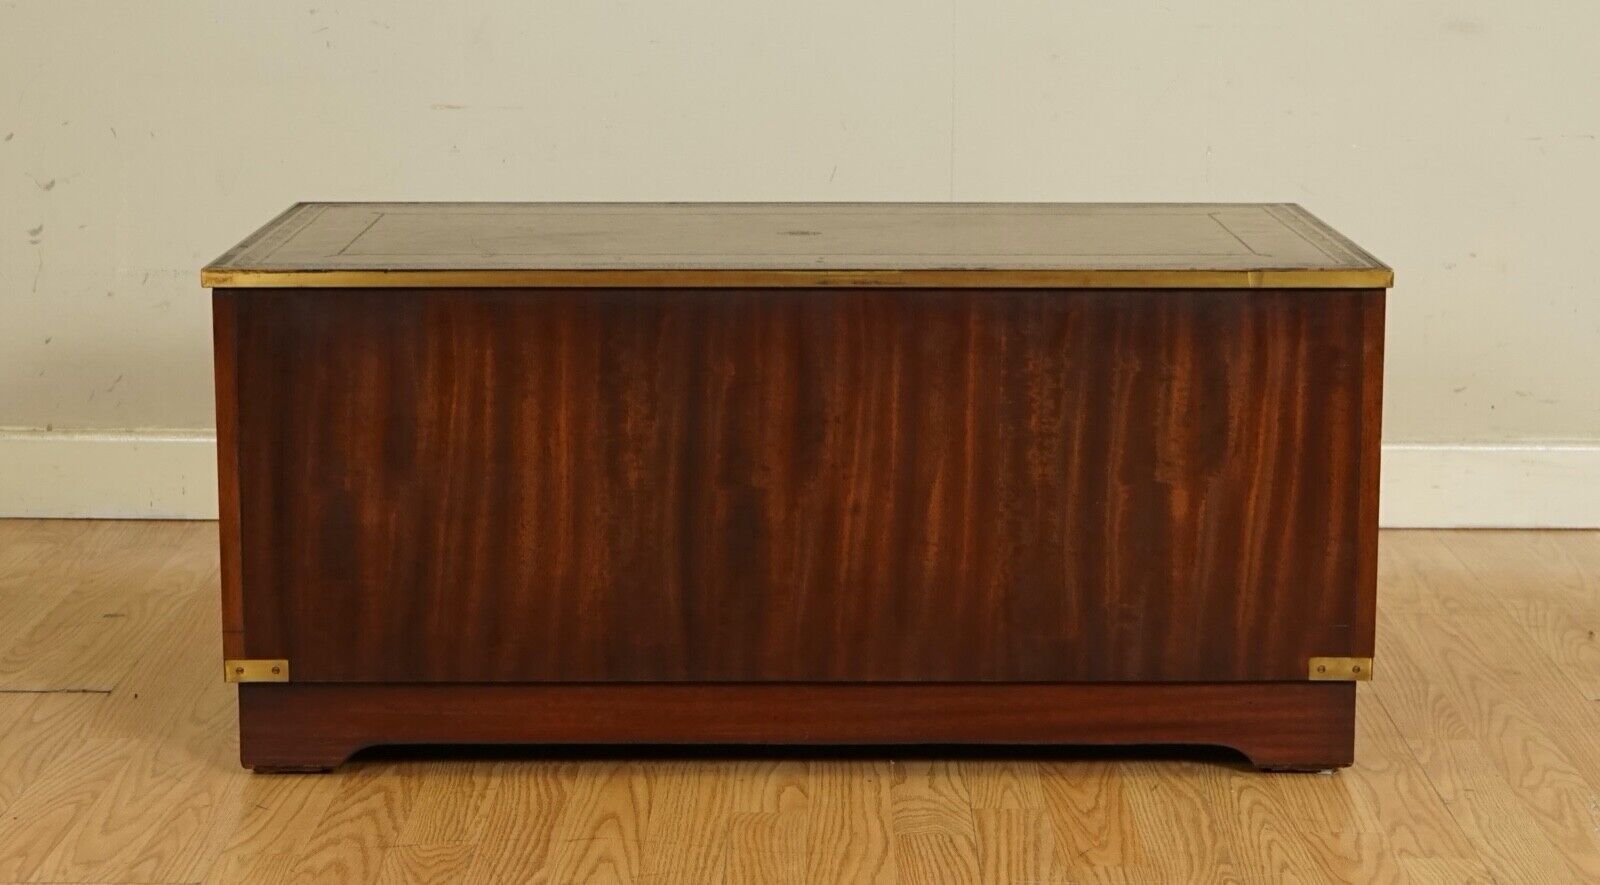 STUNNING BEVAN AND FUNNEL MILITARY CAMPAIGN CHEST TV STAND WITH BROWN LEATHER